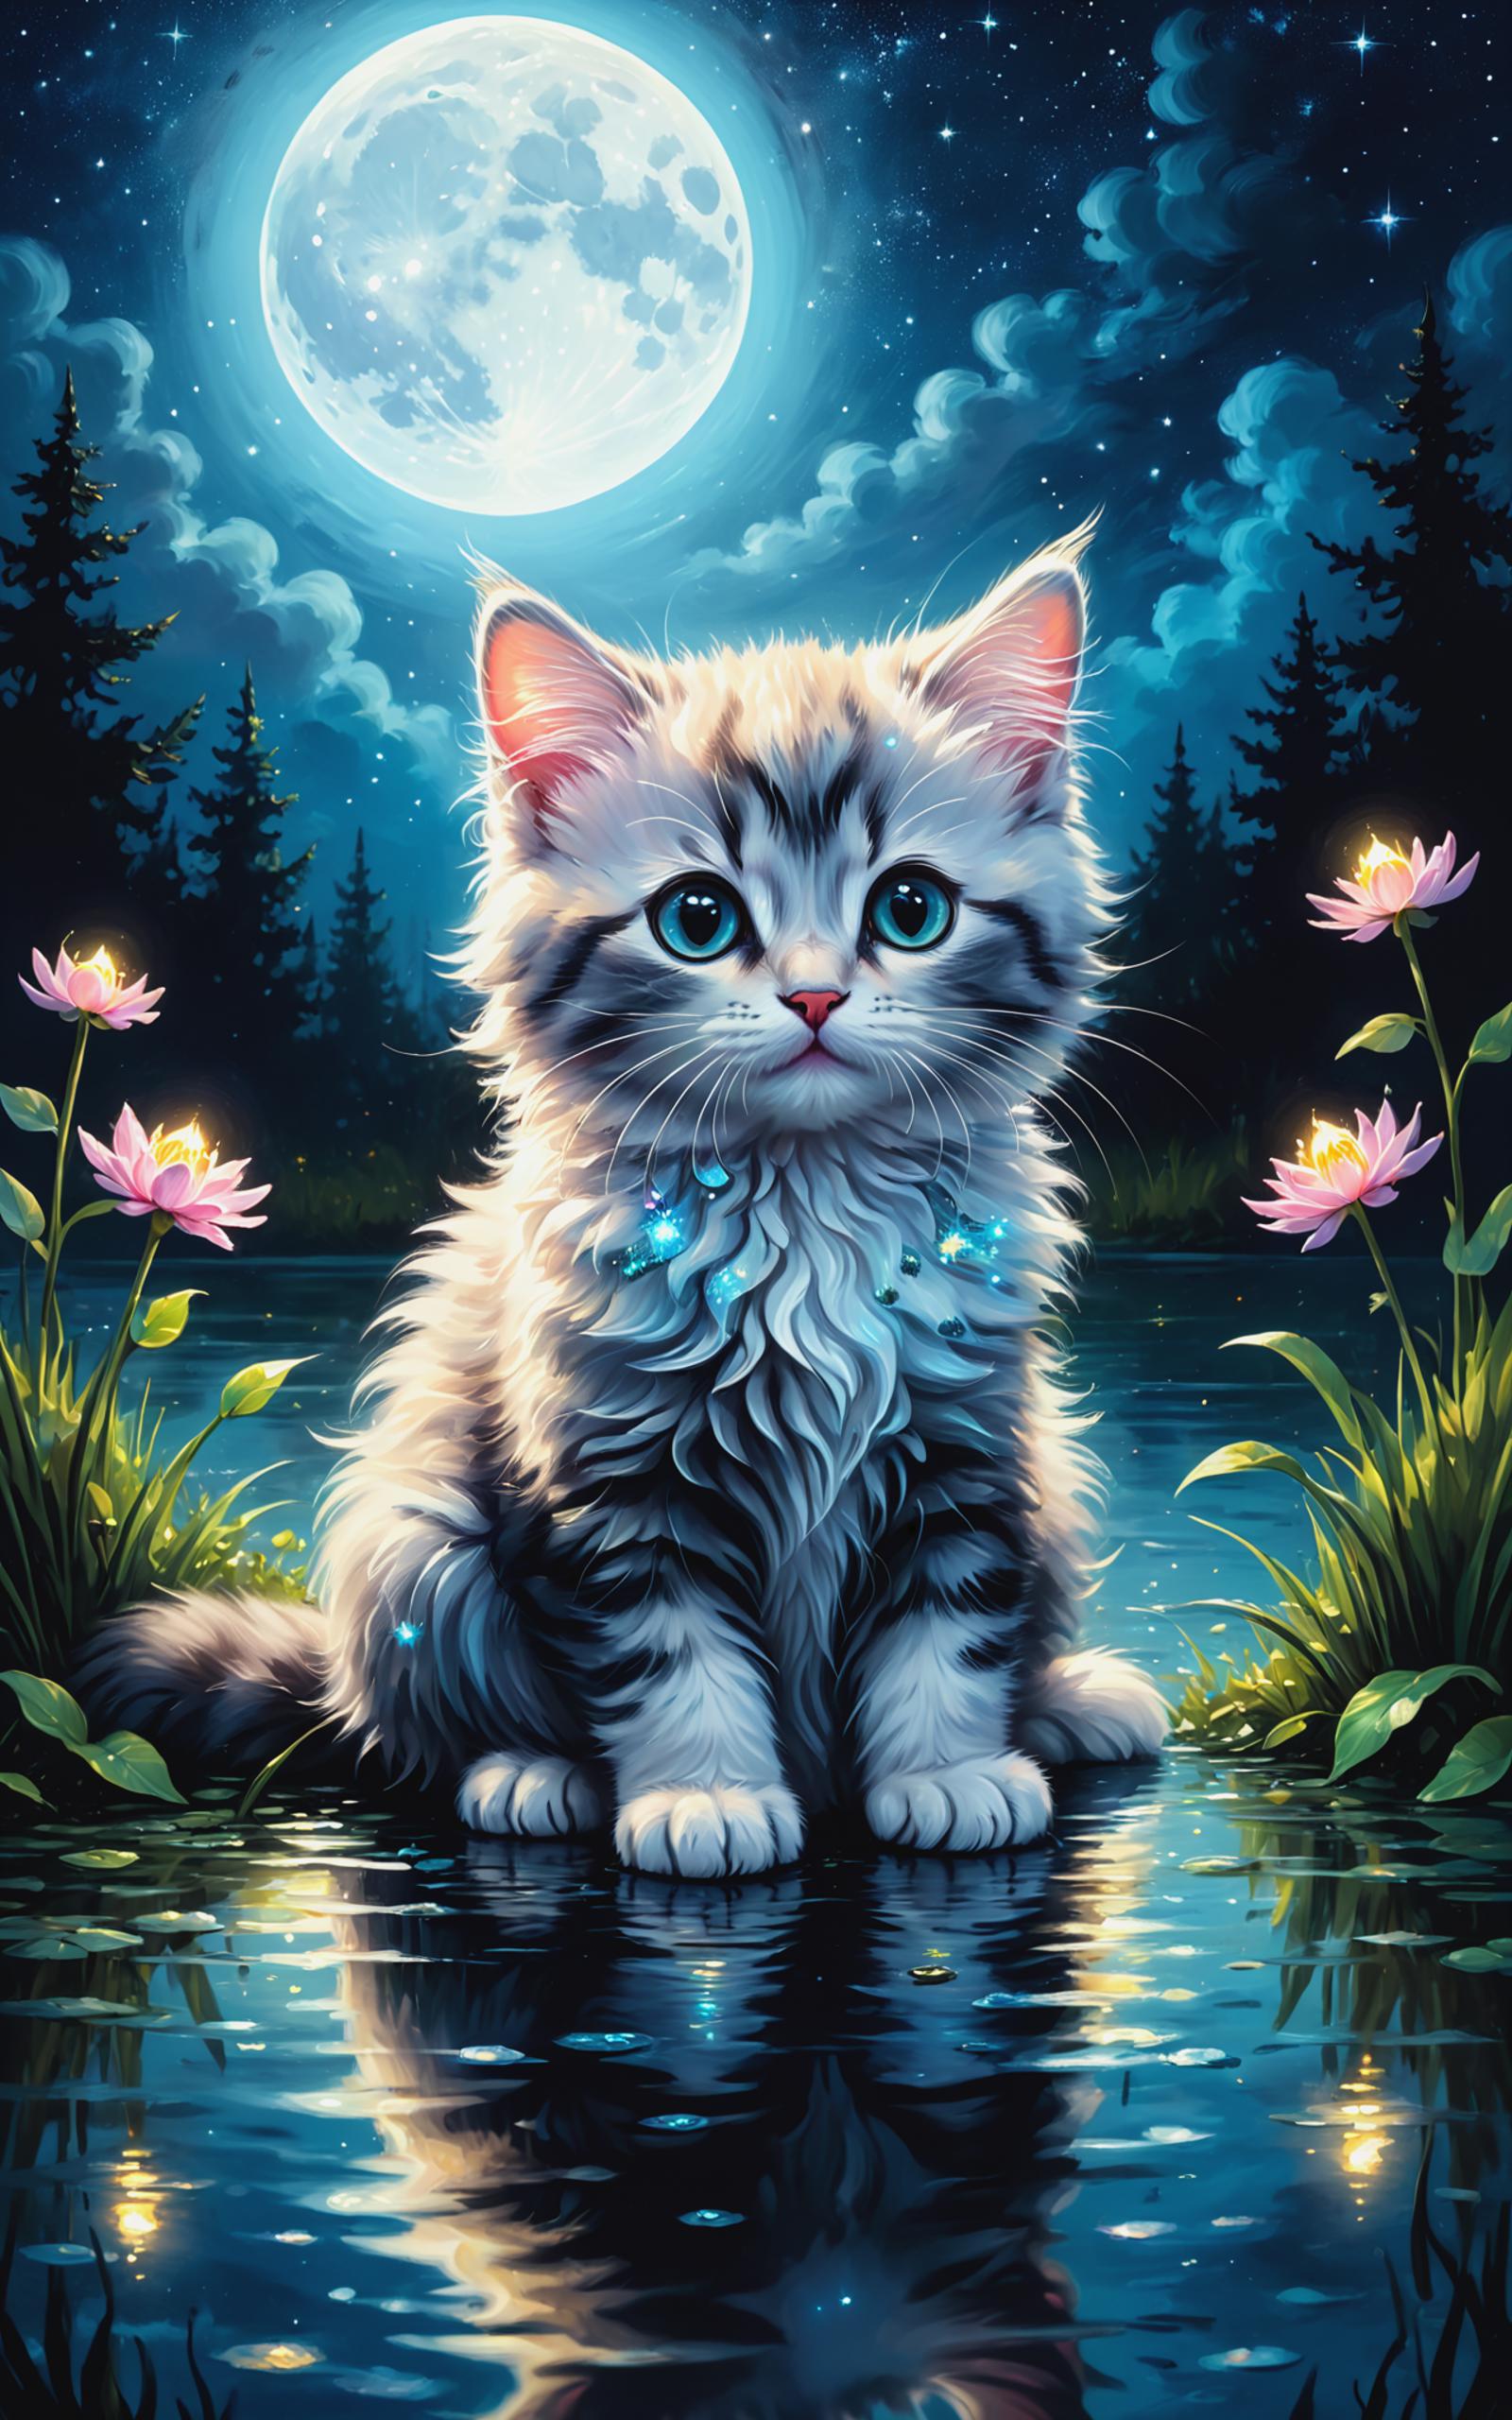 A kitten sitting by a pond at night with a full moon above.